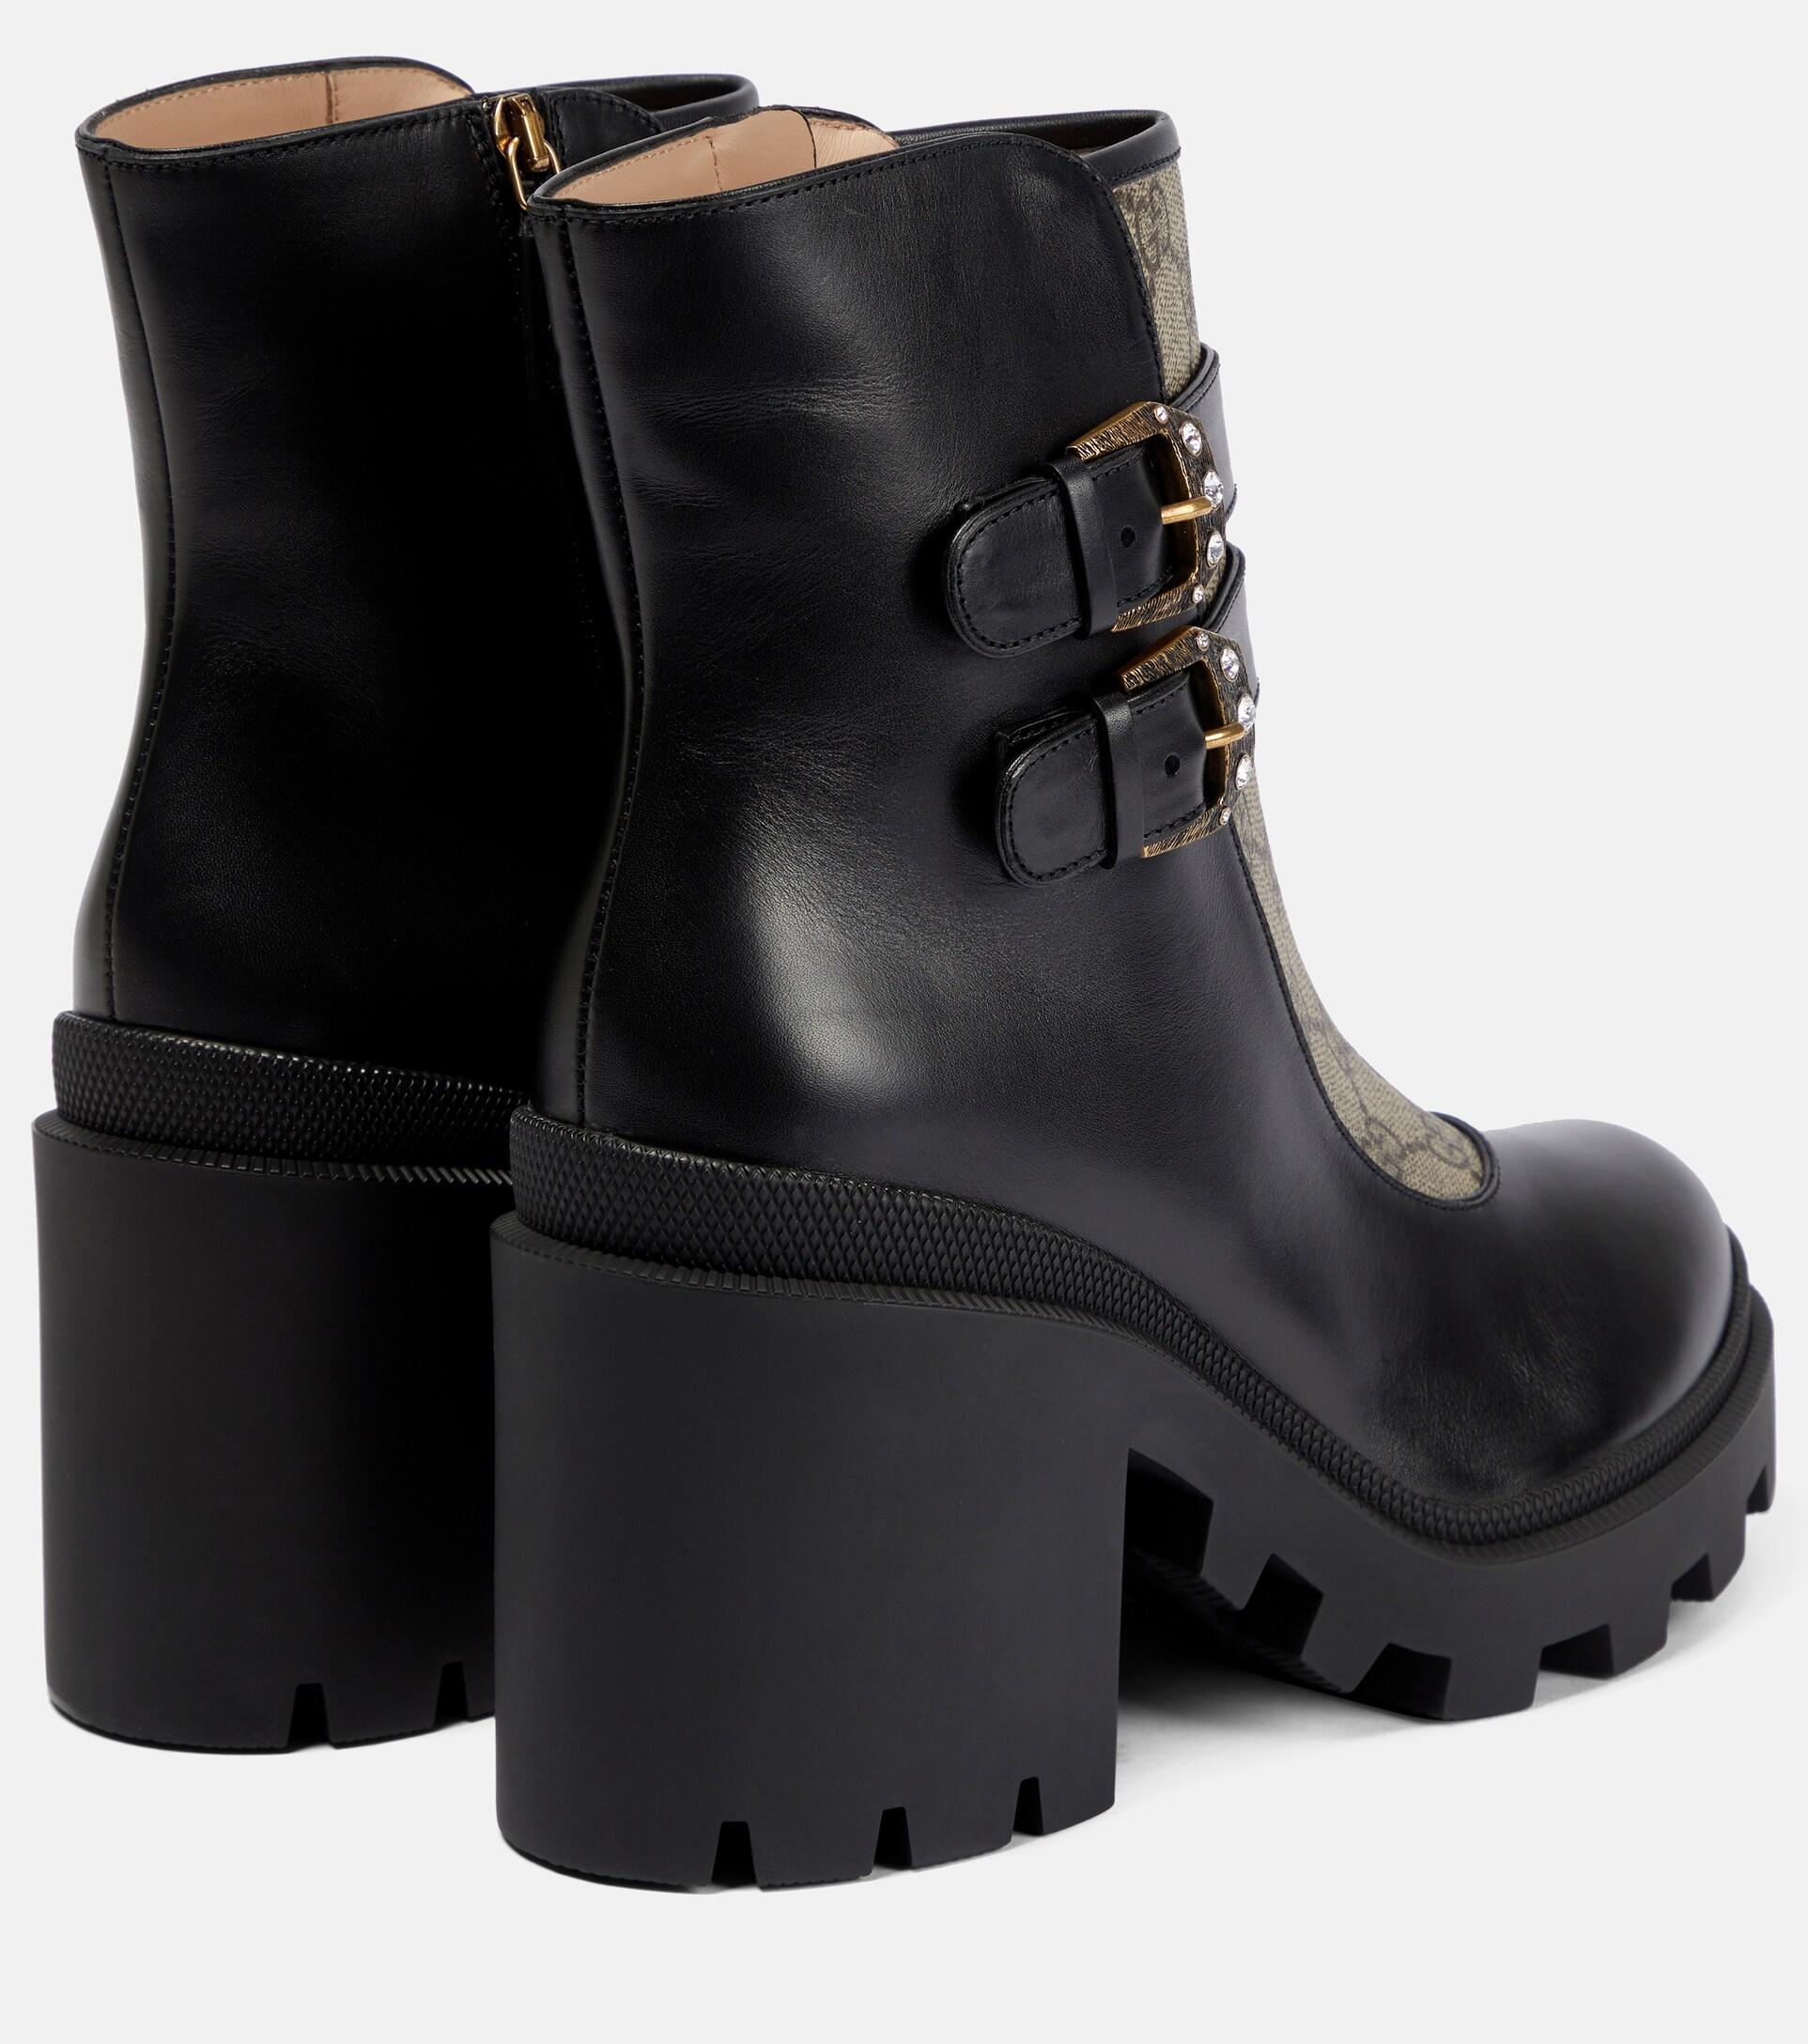 Women's ankle boot with Double G in leather and GG canvas